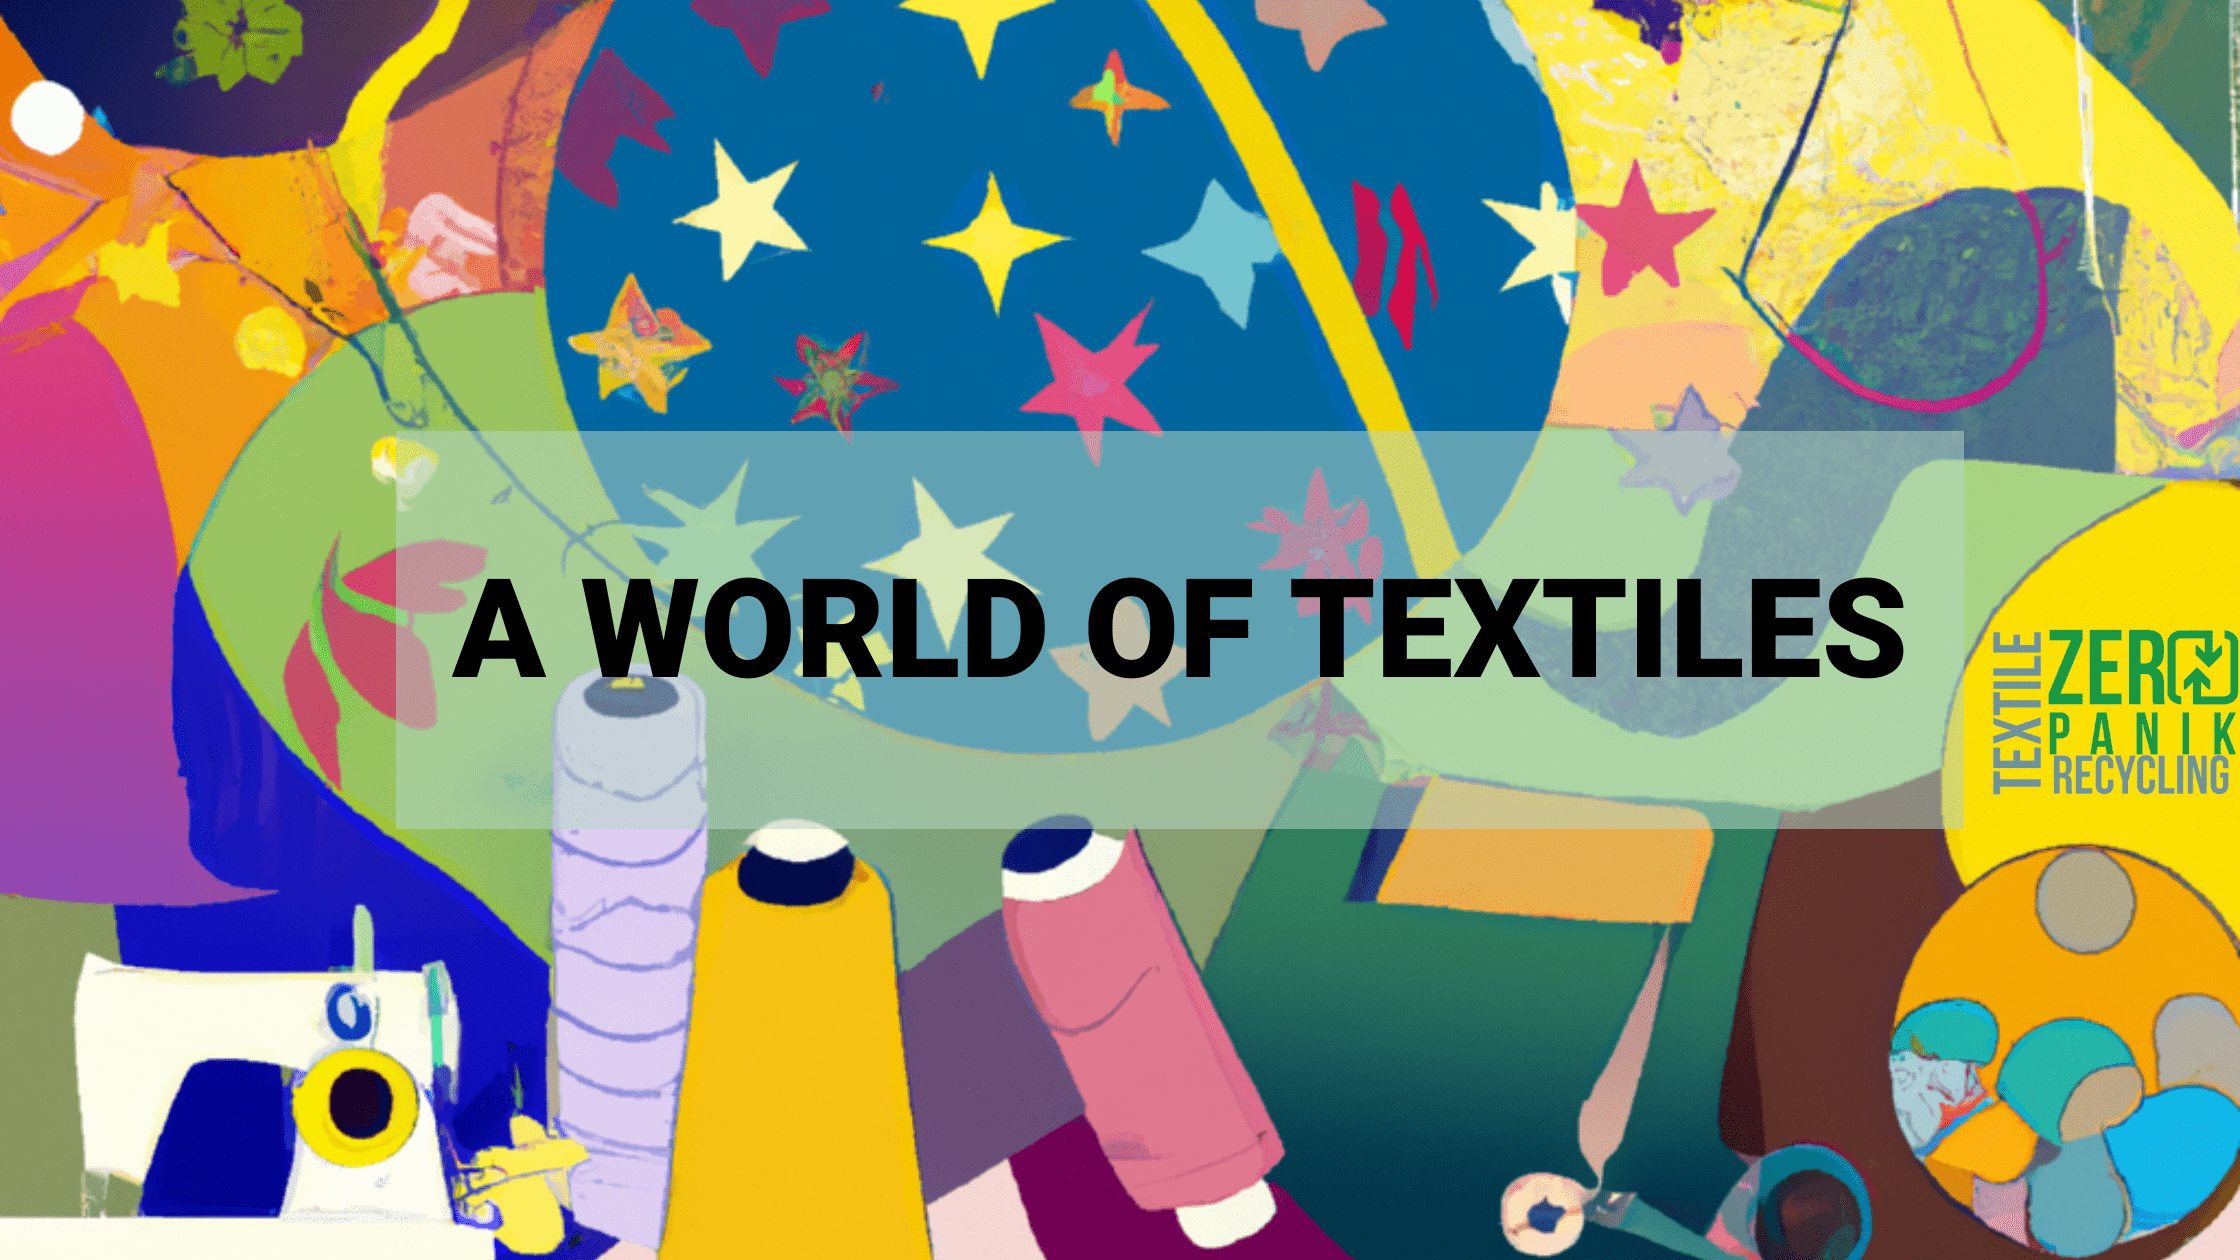 colorful image of textiles, yard, sewing machine, playful and fun. World of textiles